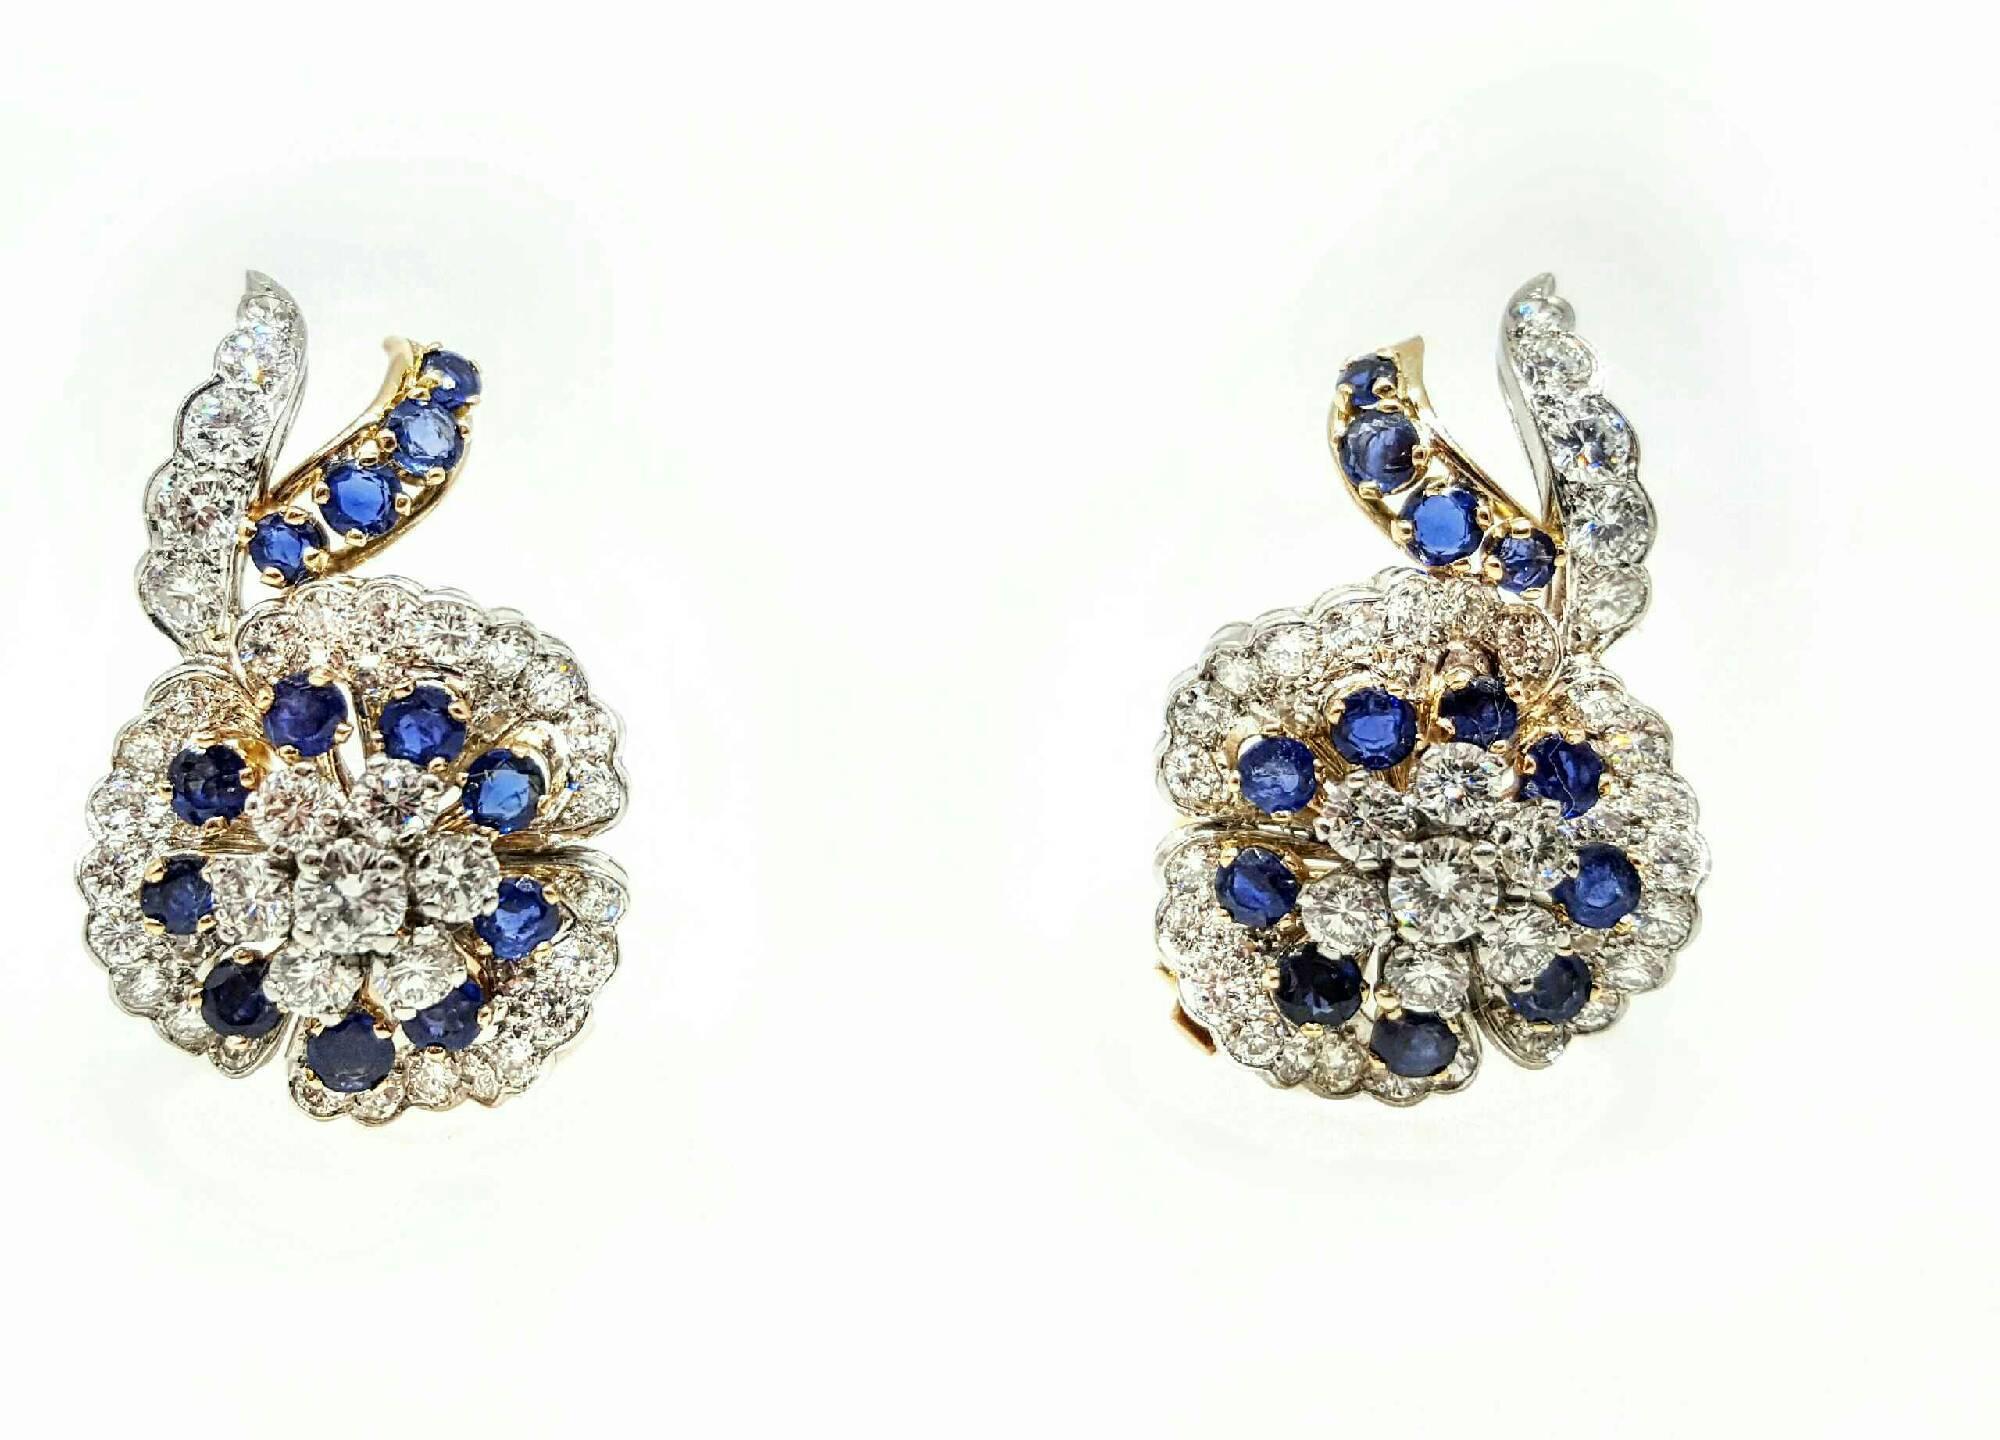 Stunning Diamond and Sapphire Earrings. Approximately 5.00cttw of diamonds and 4.00cttw of Sapphires set in 18 karat white and yellow gold. The earrings have clip on style backs. The diamonds are G-H color and VS1-VS2 clarity